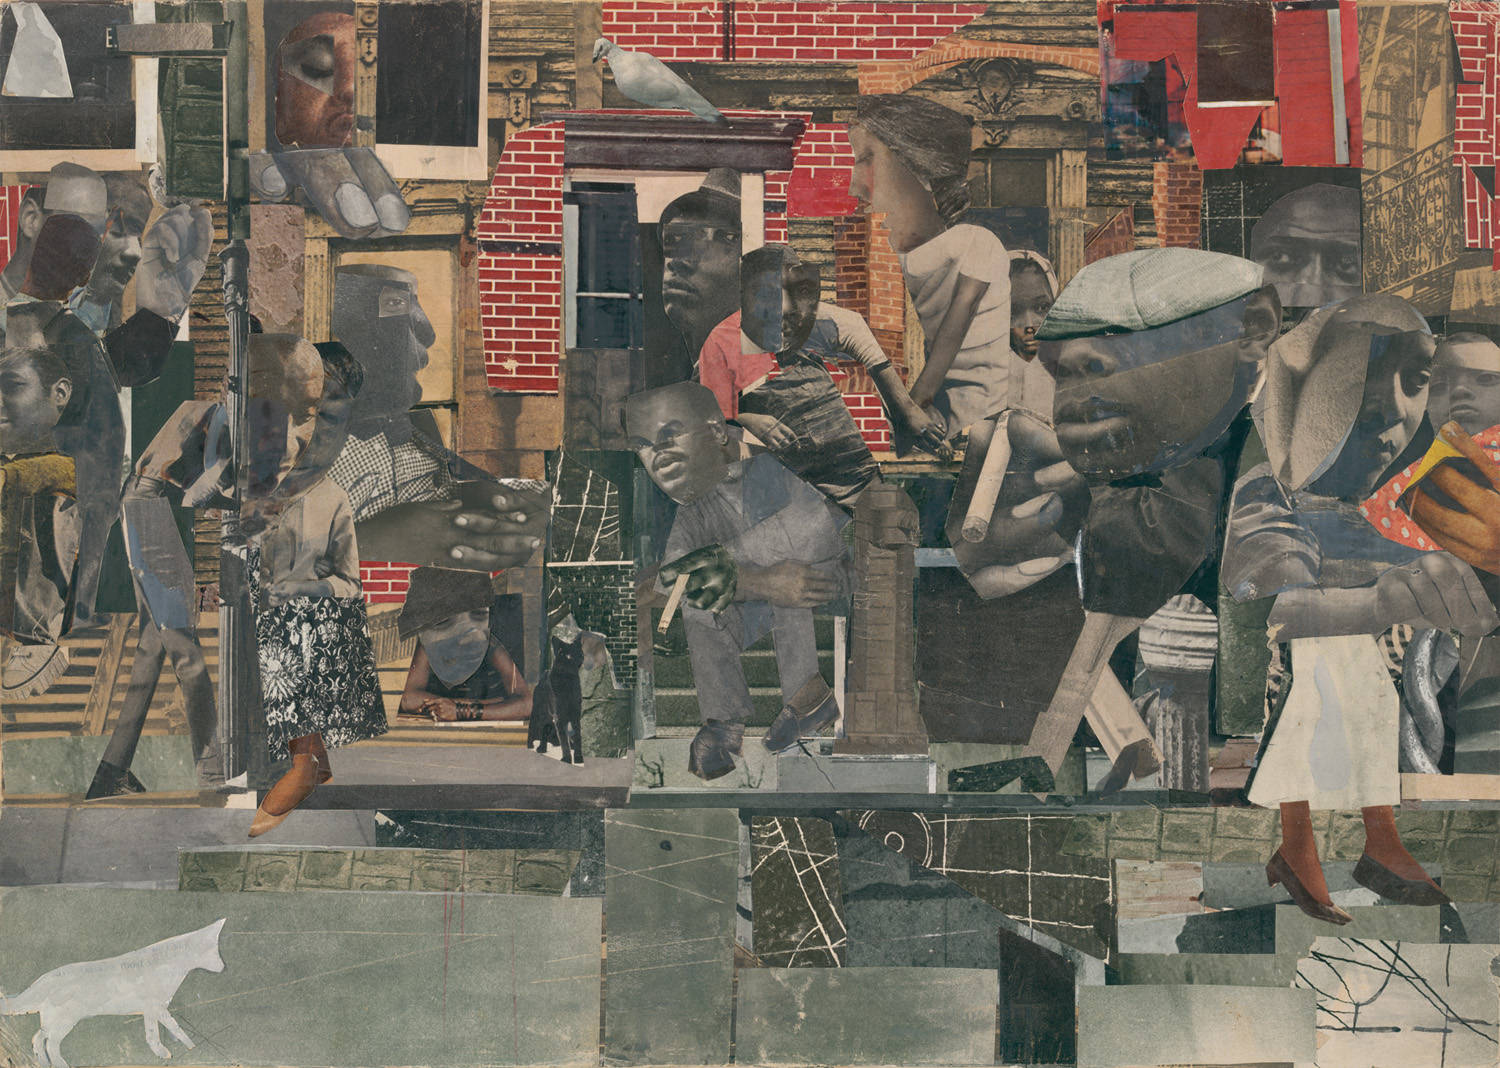 Collaged print composed of dark skinned faces, hands and legs, superimposed on an urban environment